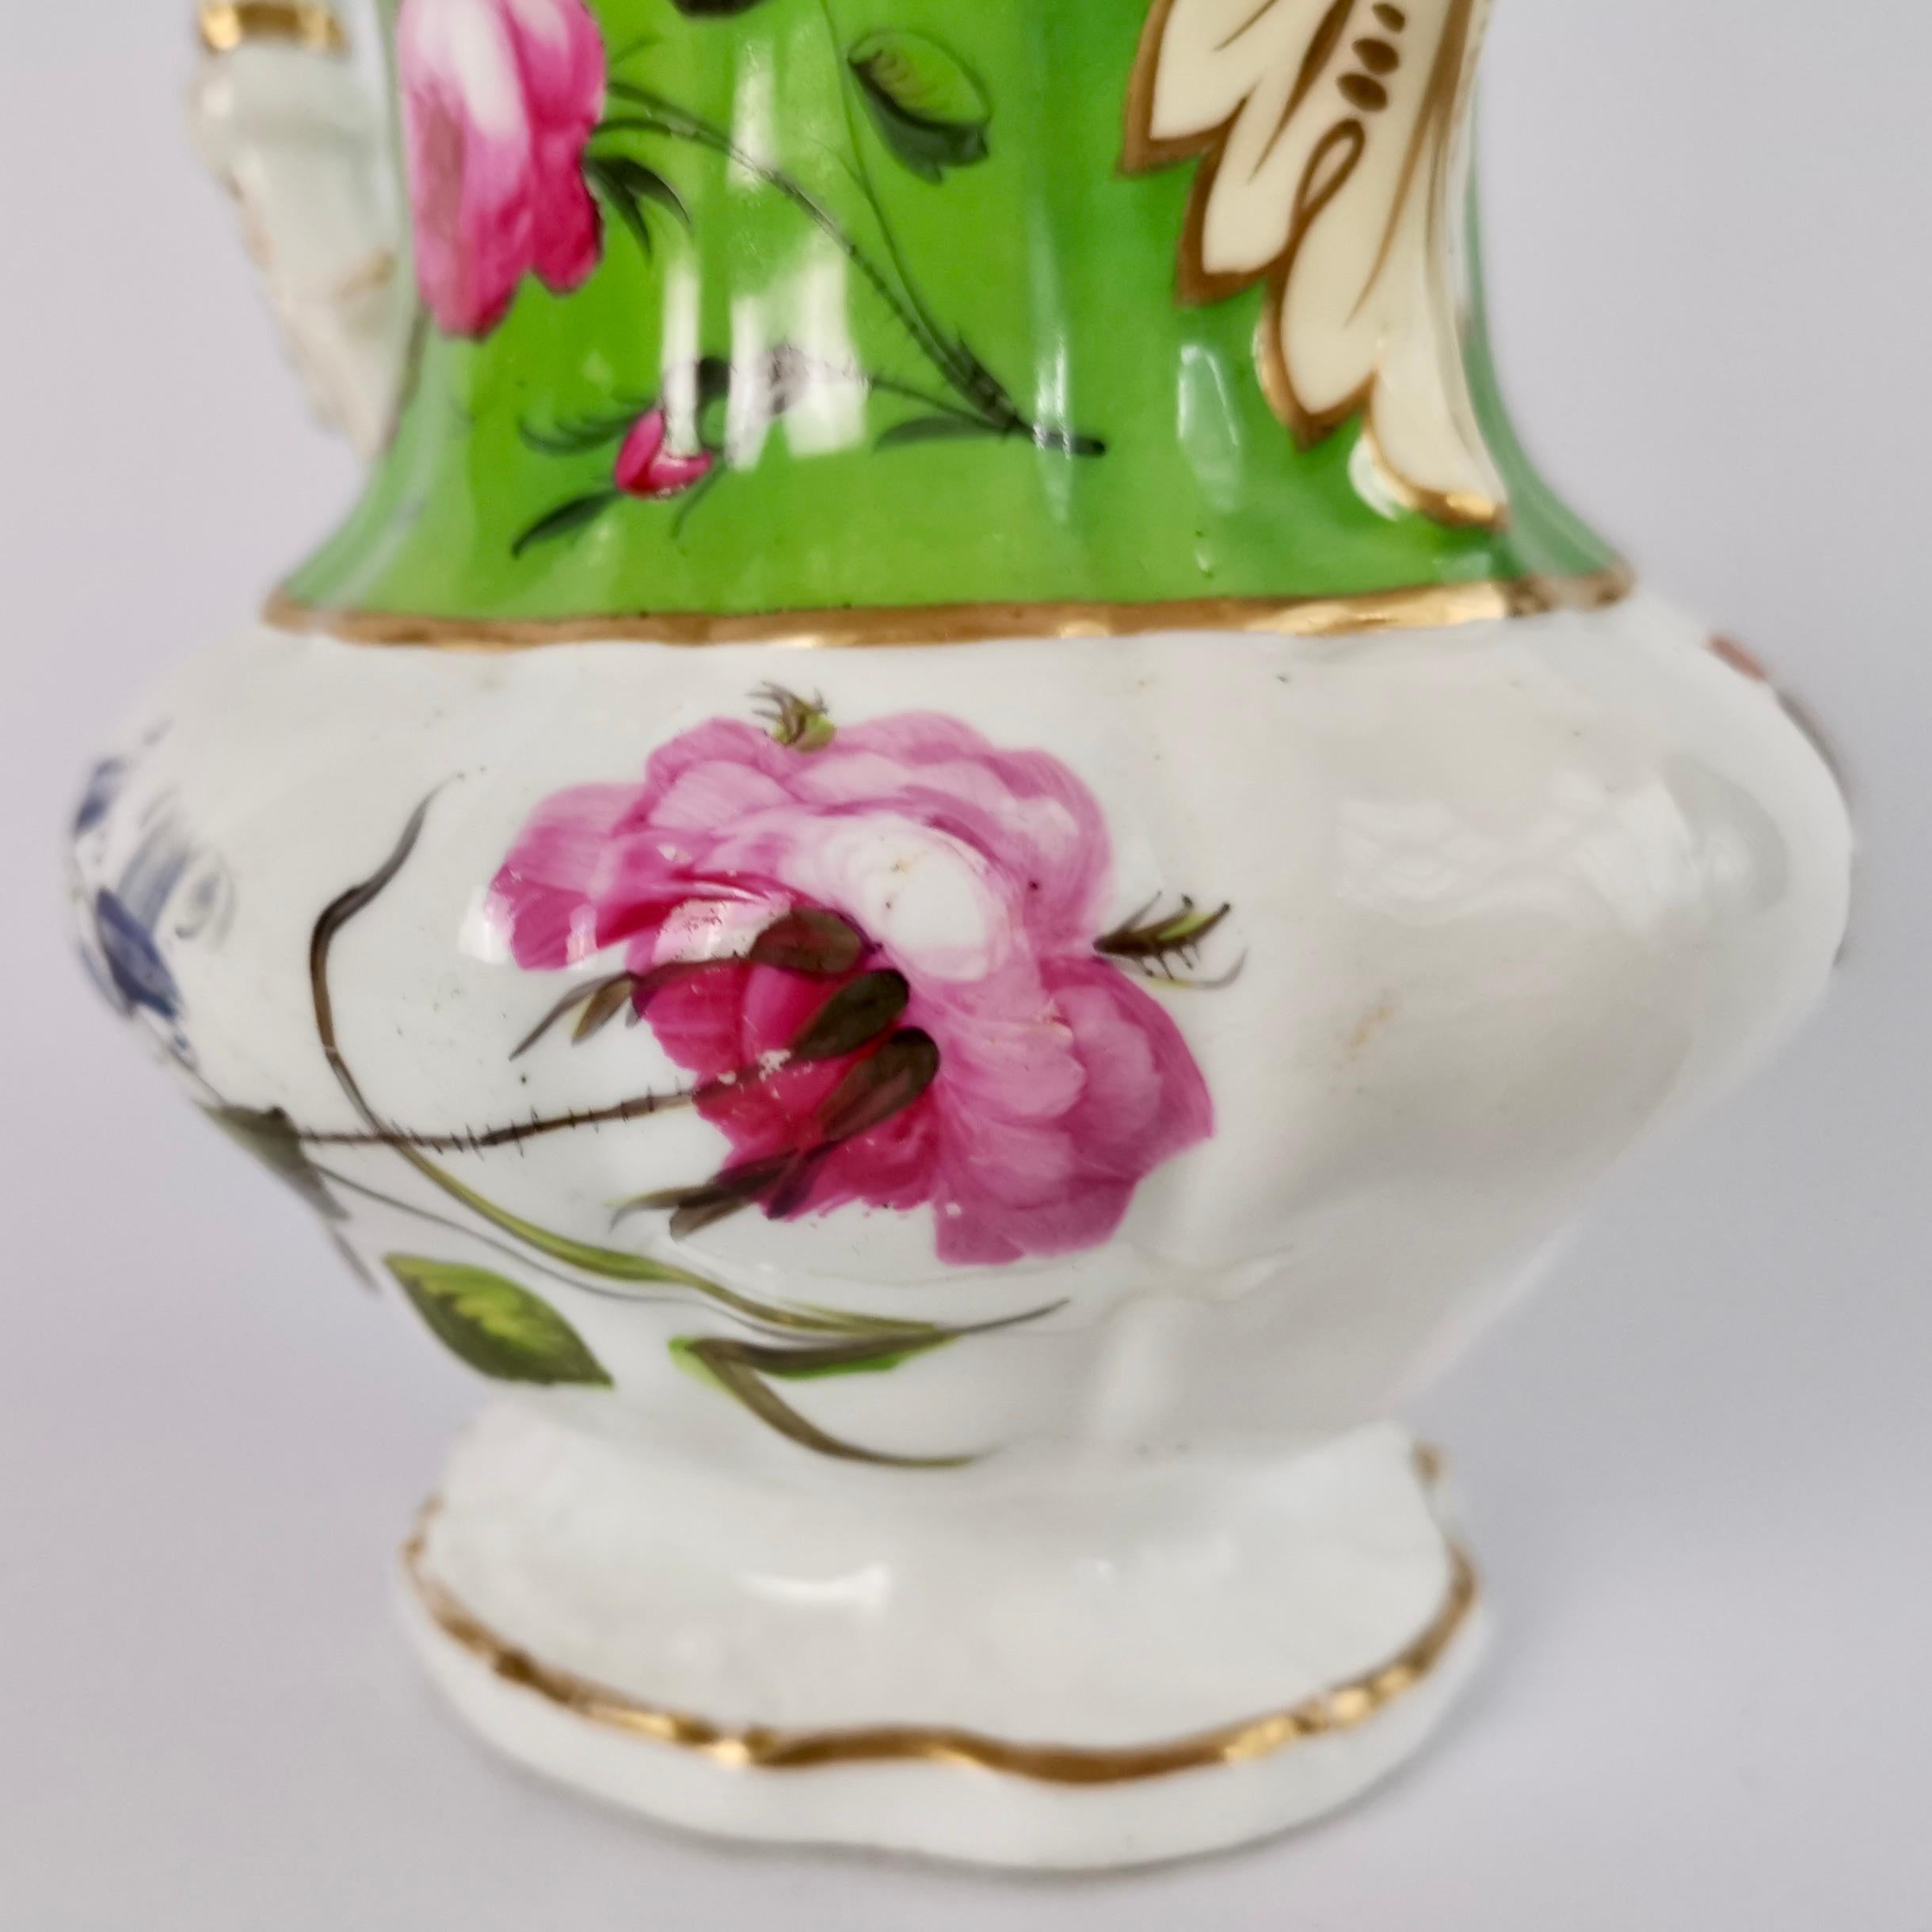 Mid-19th Century Hilditch Porcelain Pitcher, Apple Green with Hand Painted Flowers, circa 1830